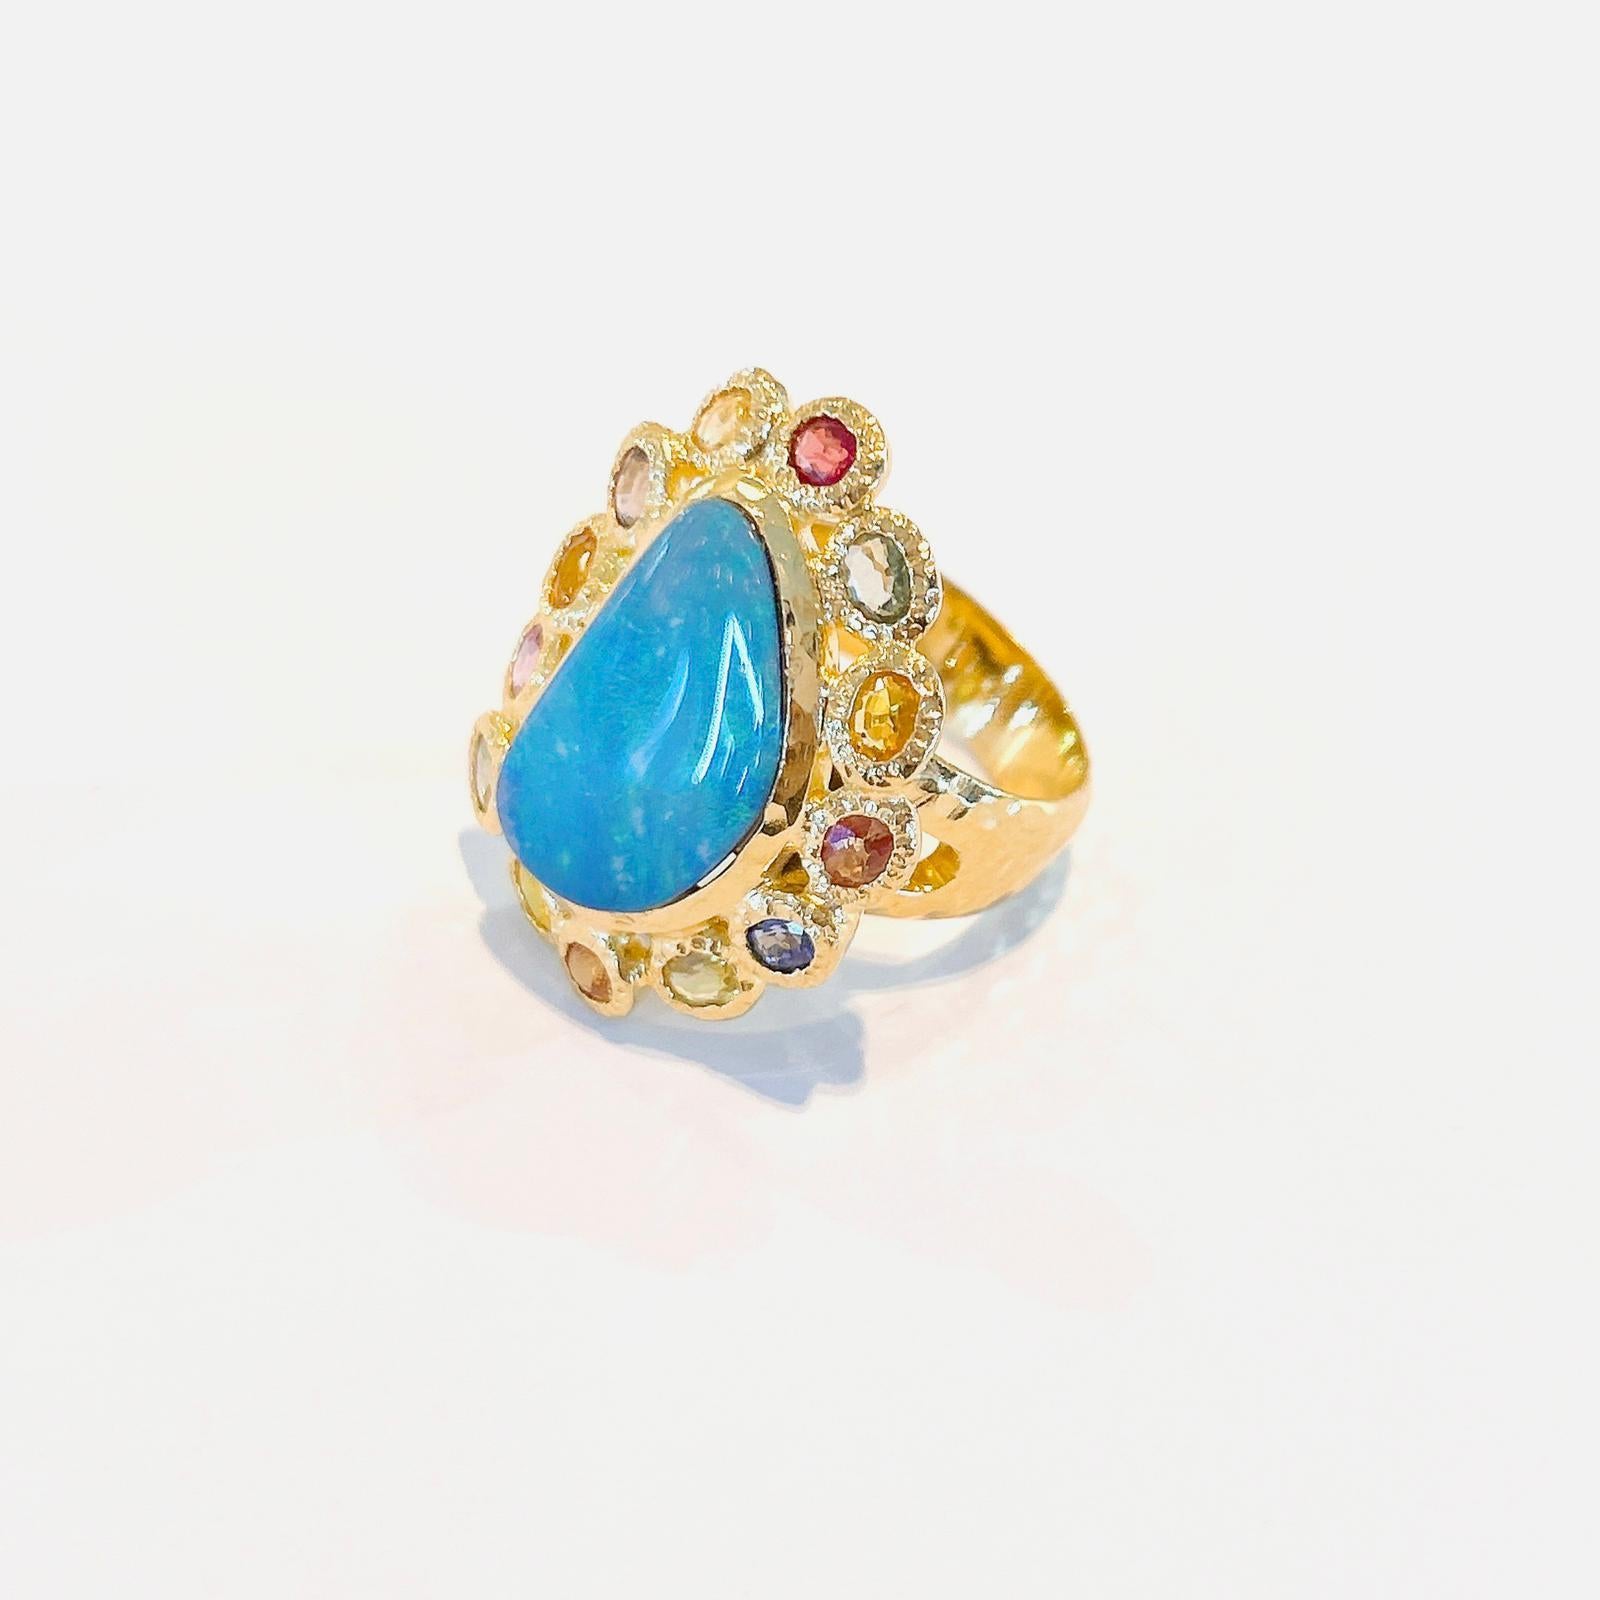 Bochic “Capri” Blue Opal & Multi Color Sapphire Cocktail Ring Set In 22K Gold & Silver 
Multi natural gem Ring 
Beautiful Natural Blue Opal - 29 carats
Natural Multi Color Sapphires from Sri Lanka - 6 carats 
Round and oval brilliant shapes 
This